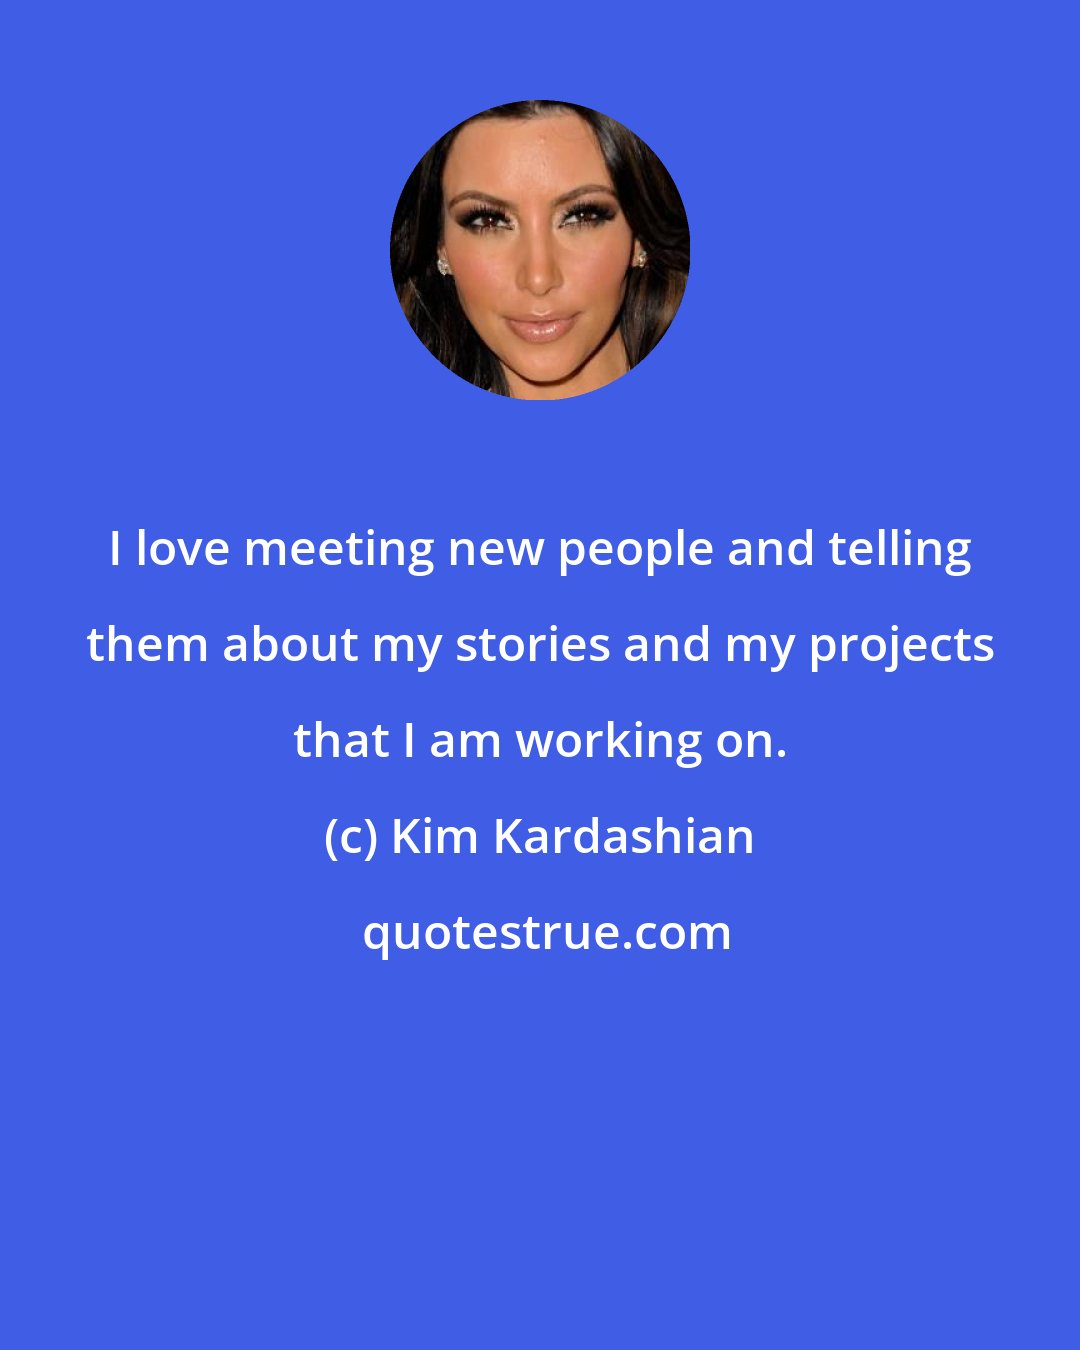 Kim Kardashian: I love meeting new people and telling them about my stories and my projects that I am working on.